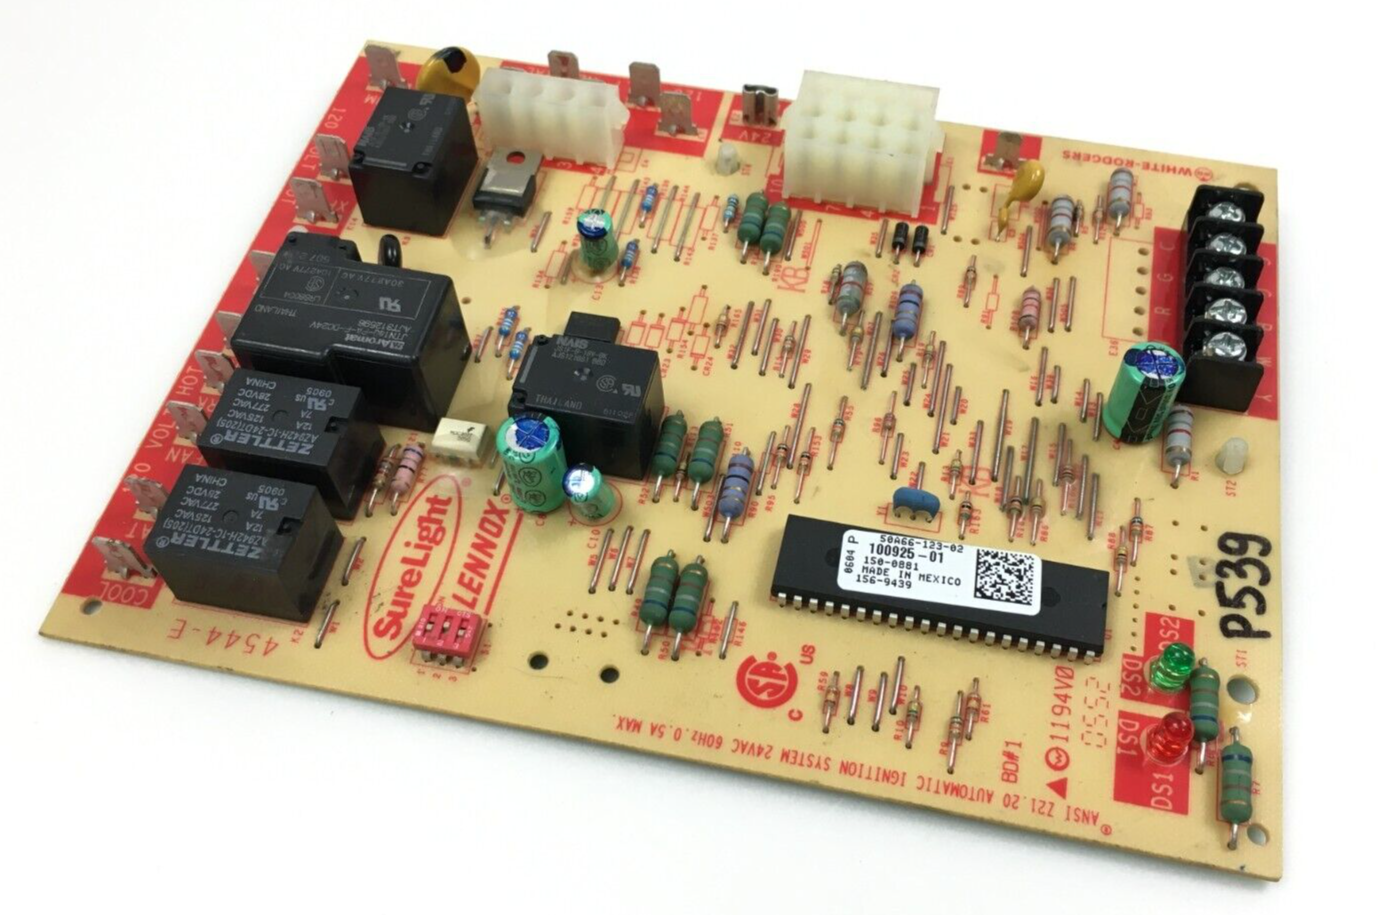 LENNOX 50A66-123-02 SureLight WhiteRodgers Control Circuit Board 100925-01 #P539 - $55.17